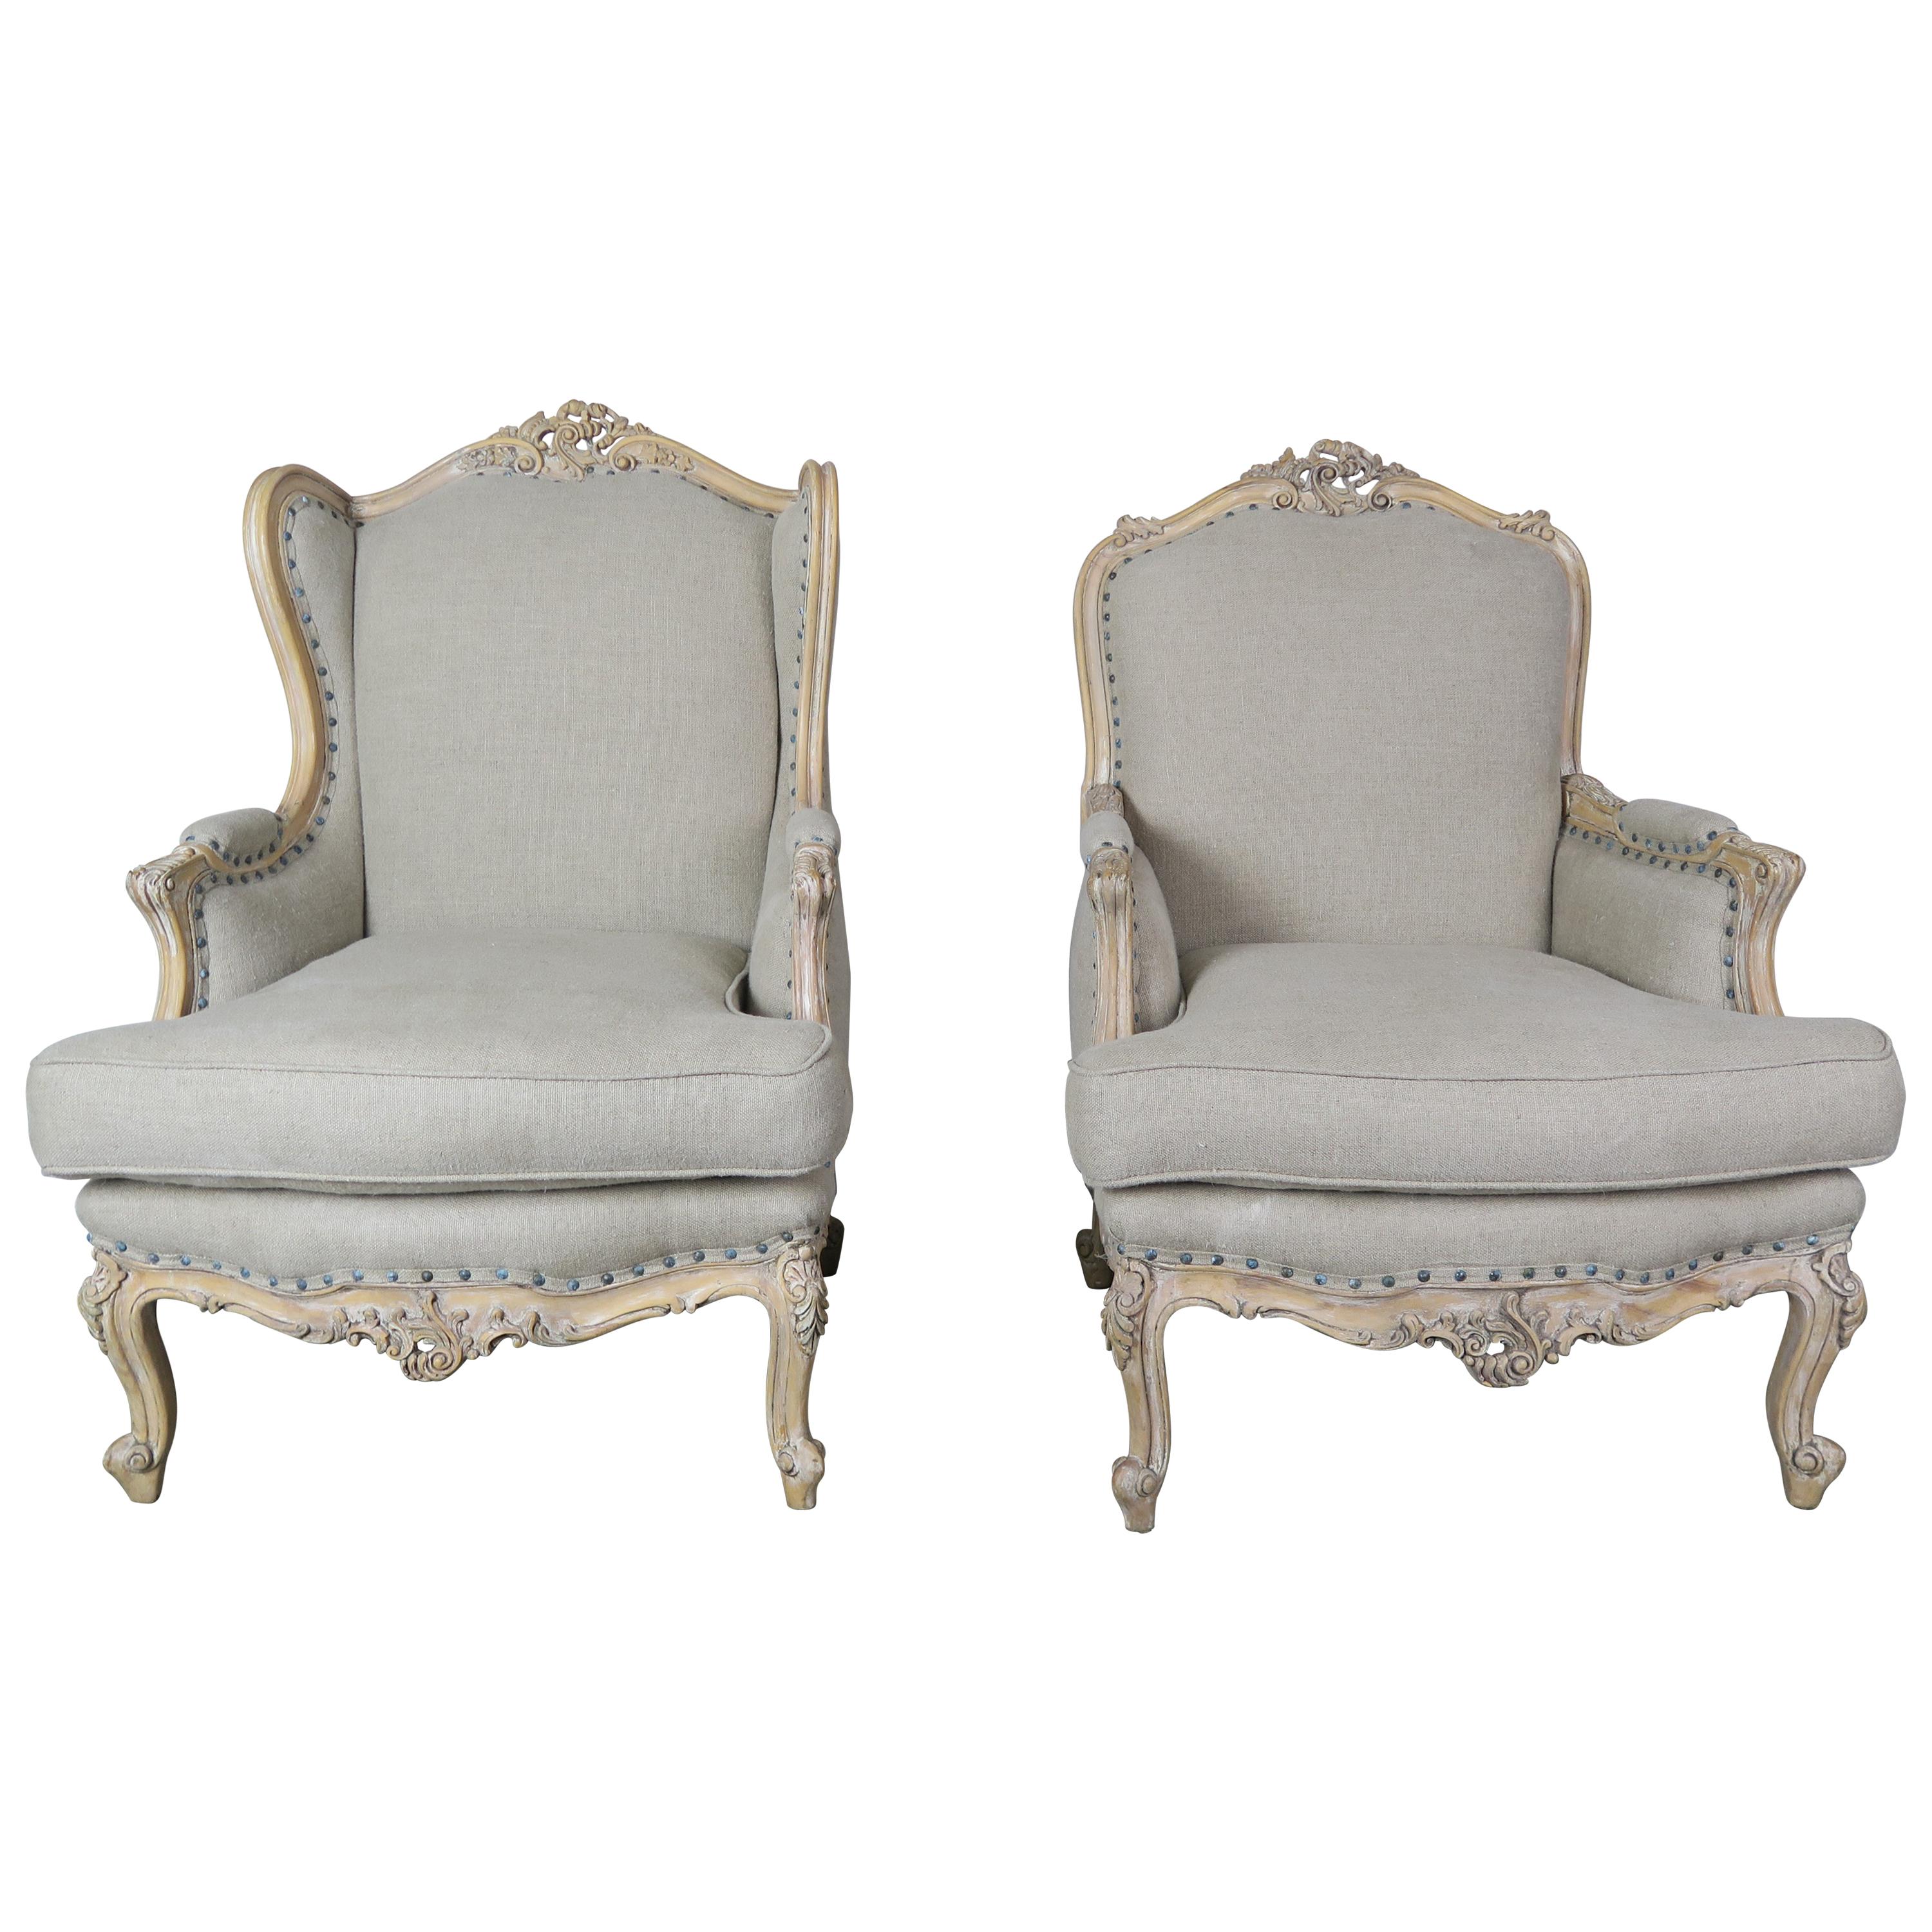 French Louis XV Style Carved Wood Armchairs, His & Her